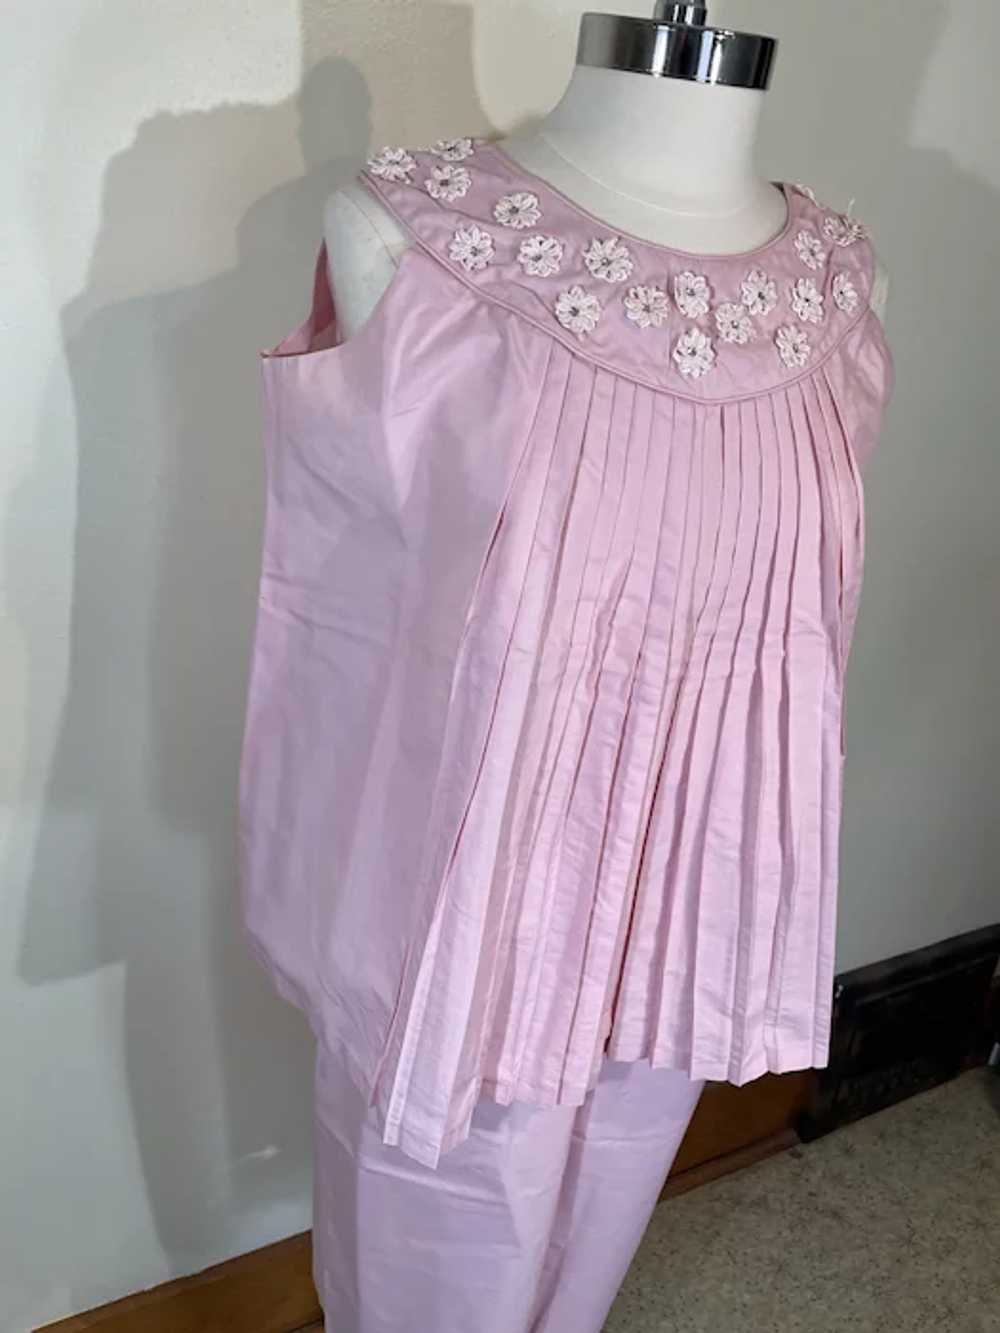 Vintage 1950s Pink Cotton Maternity Top and Skirt - image 2